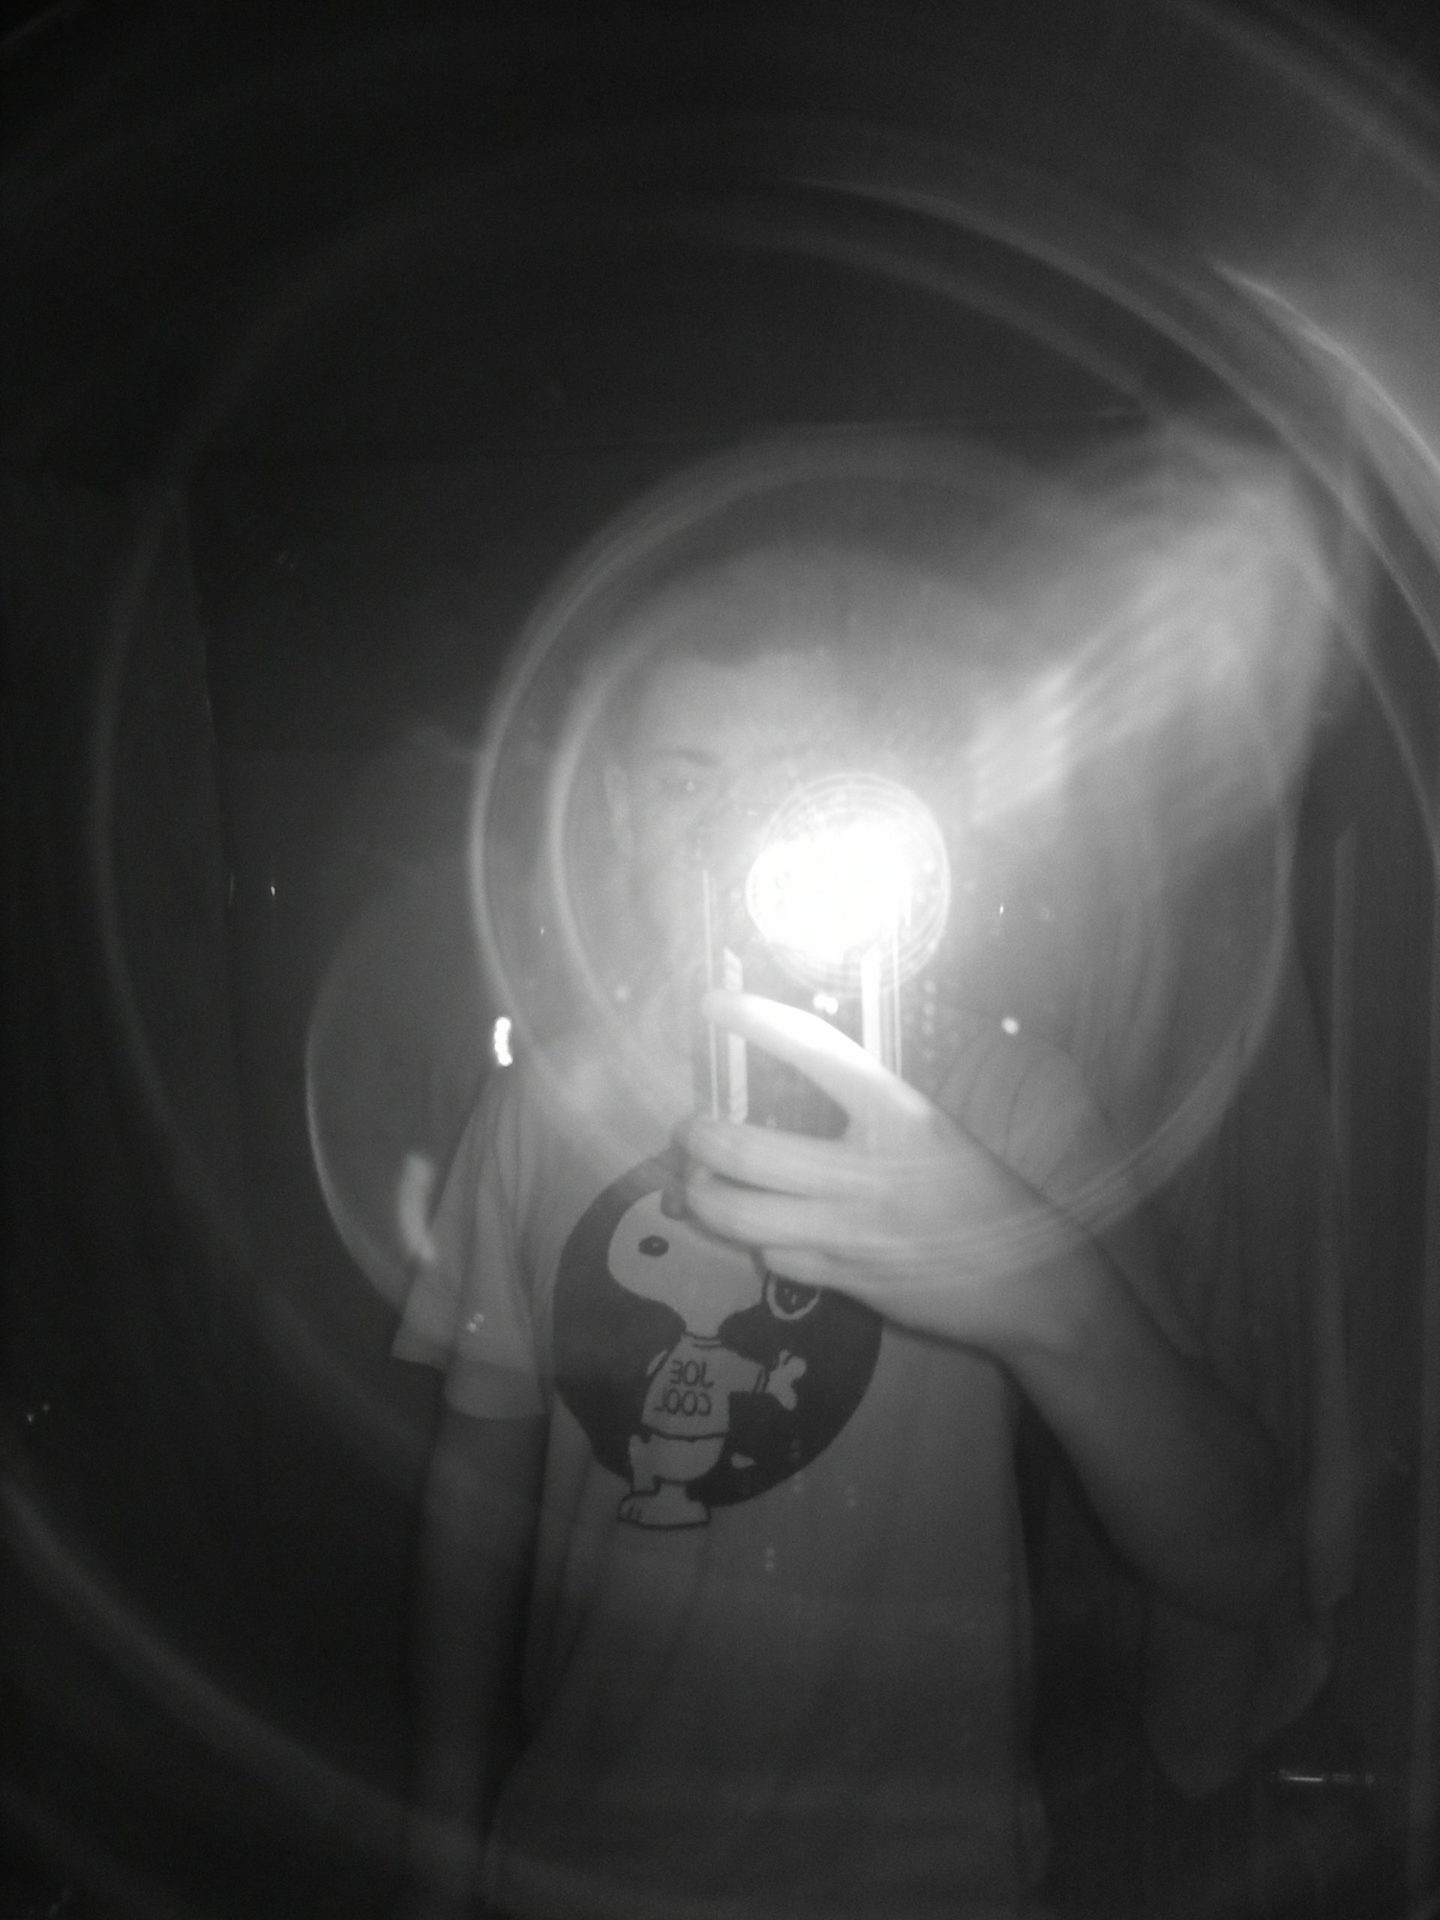 Doogee S96 Pro Night Vision Camera Sample showing a man taking a photo with his phone and a halo of the flash.